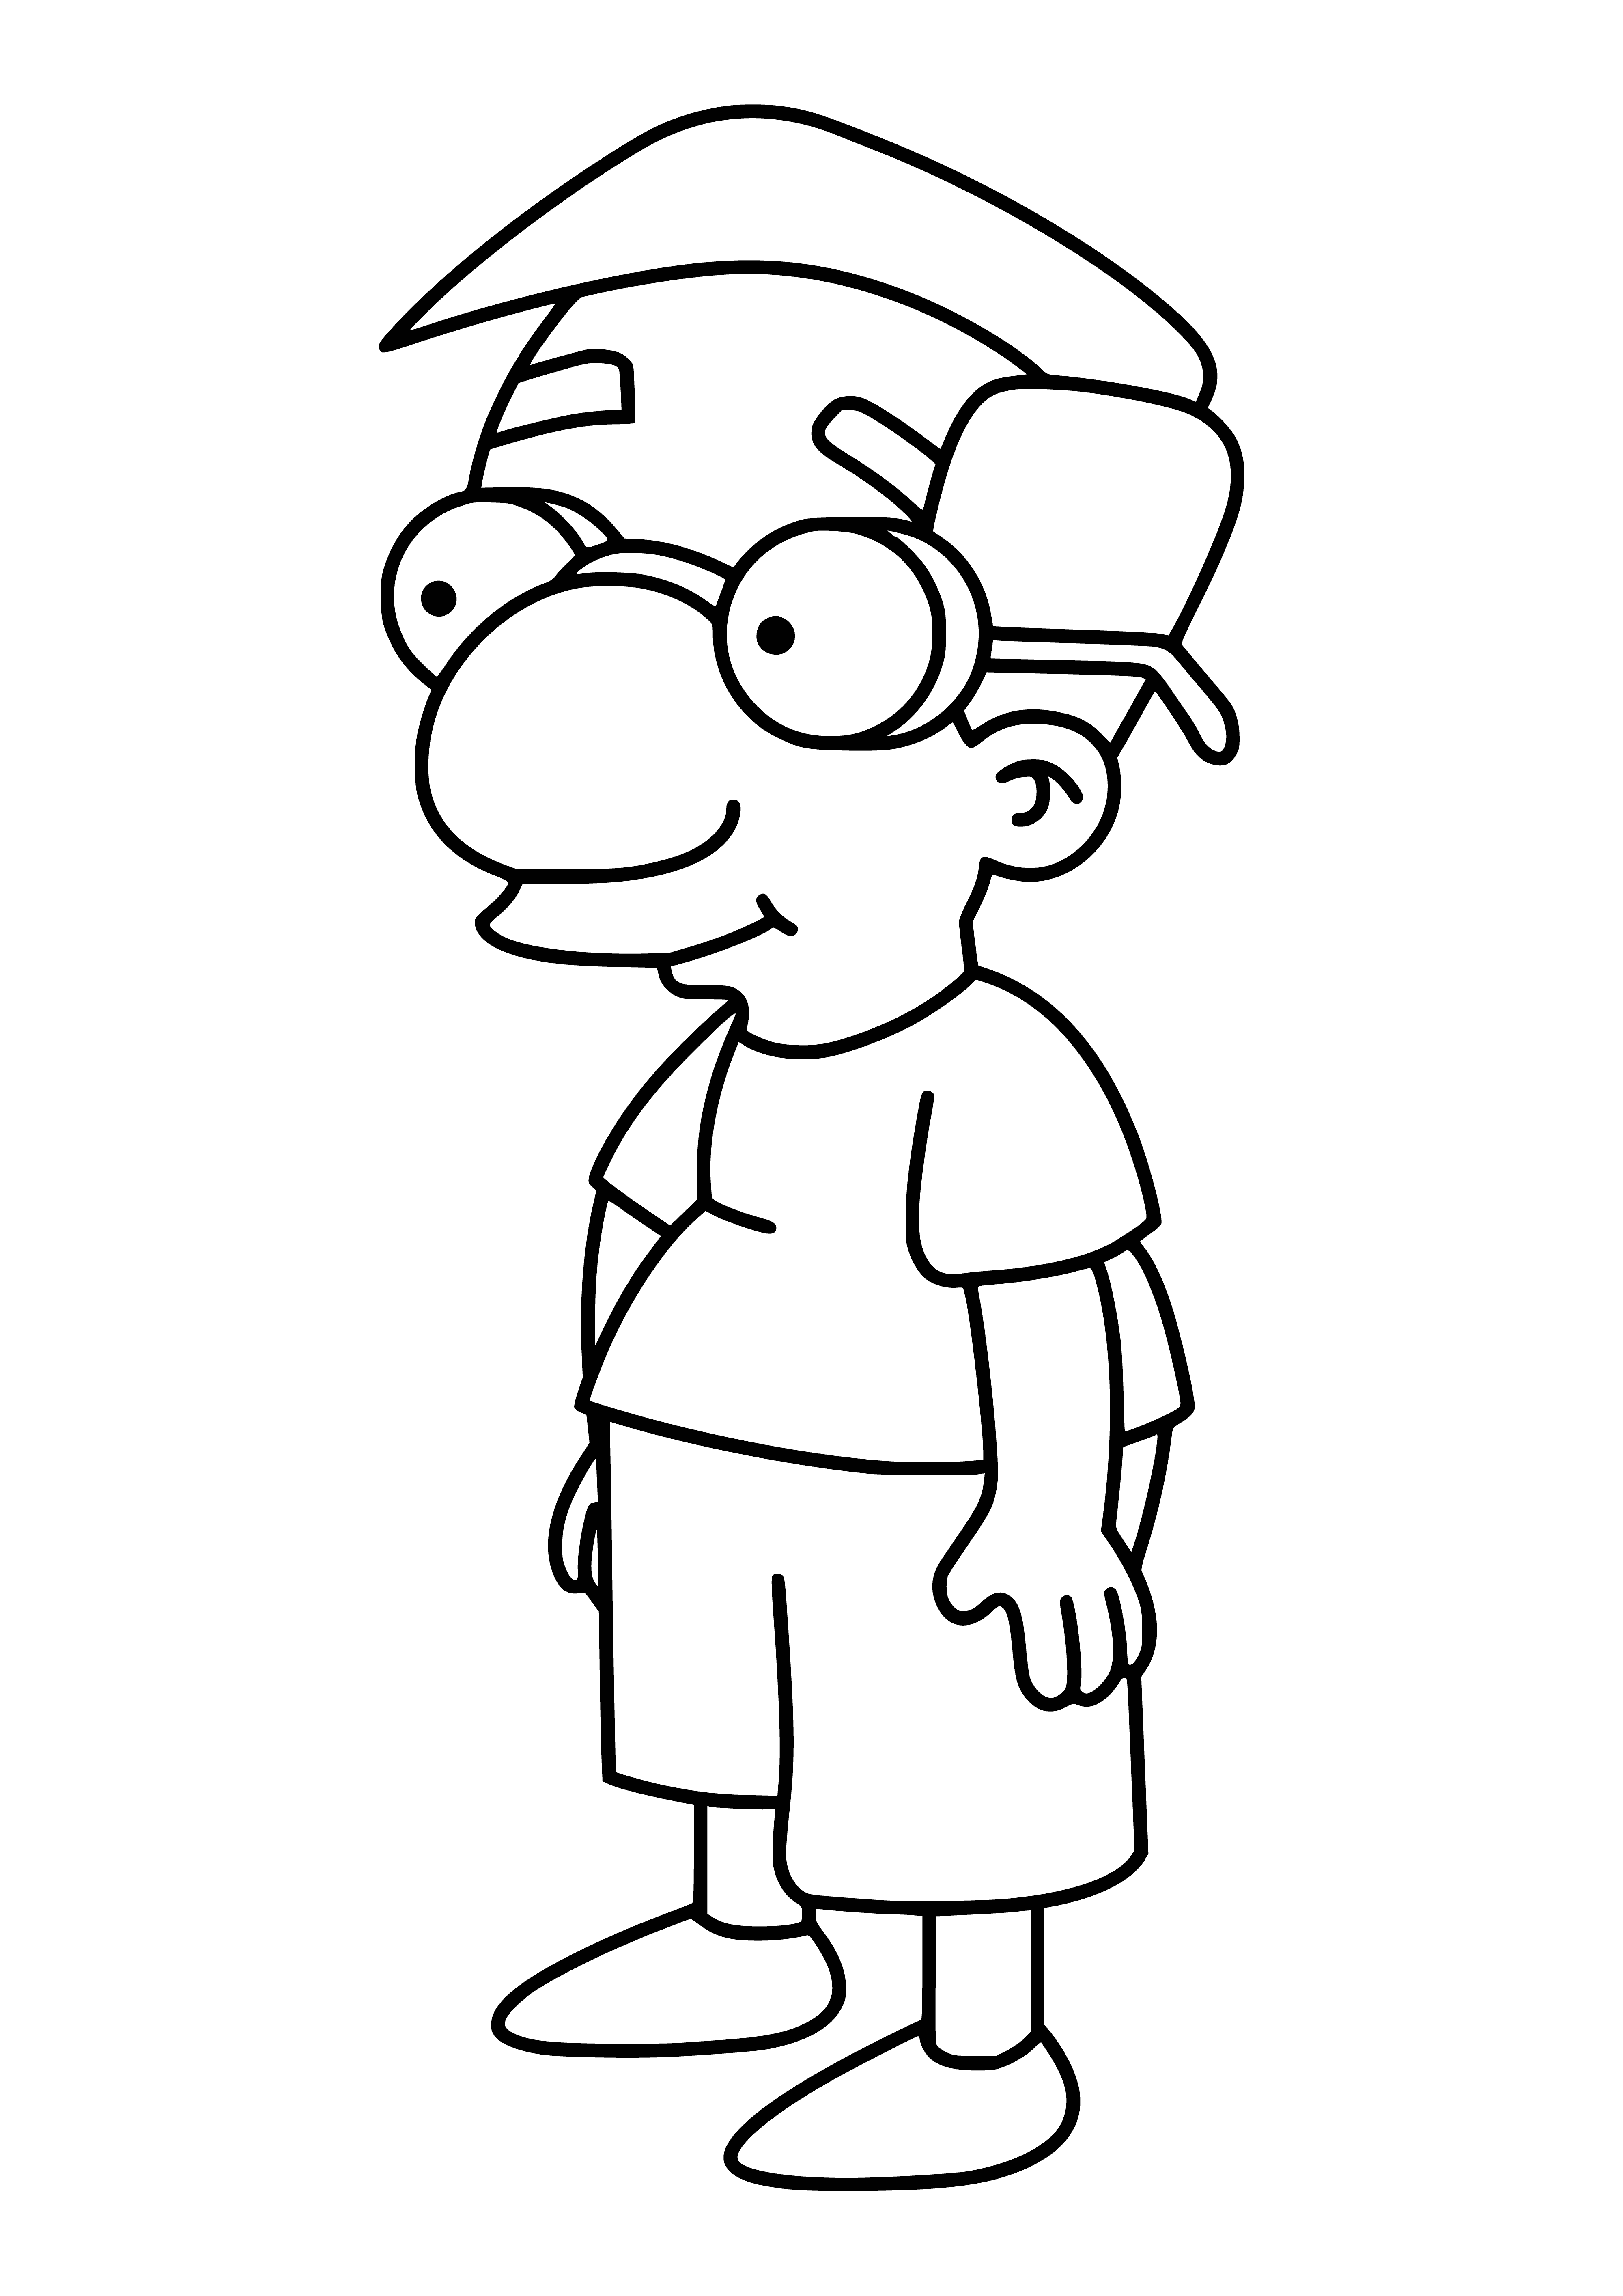 Bart's friend - Millhouse coloring page